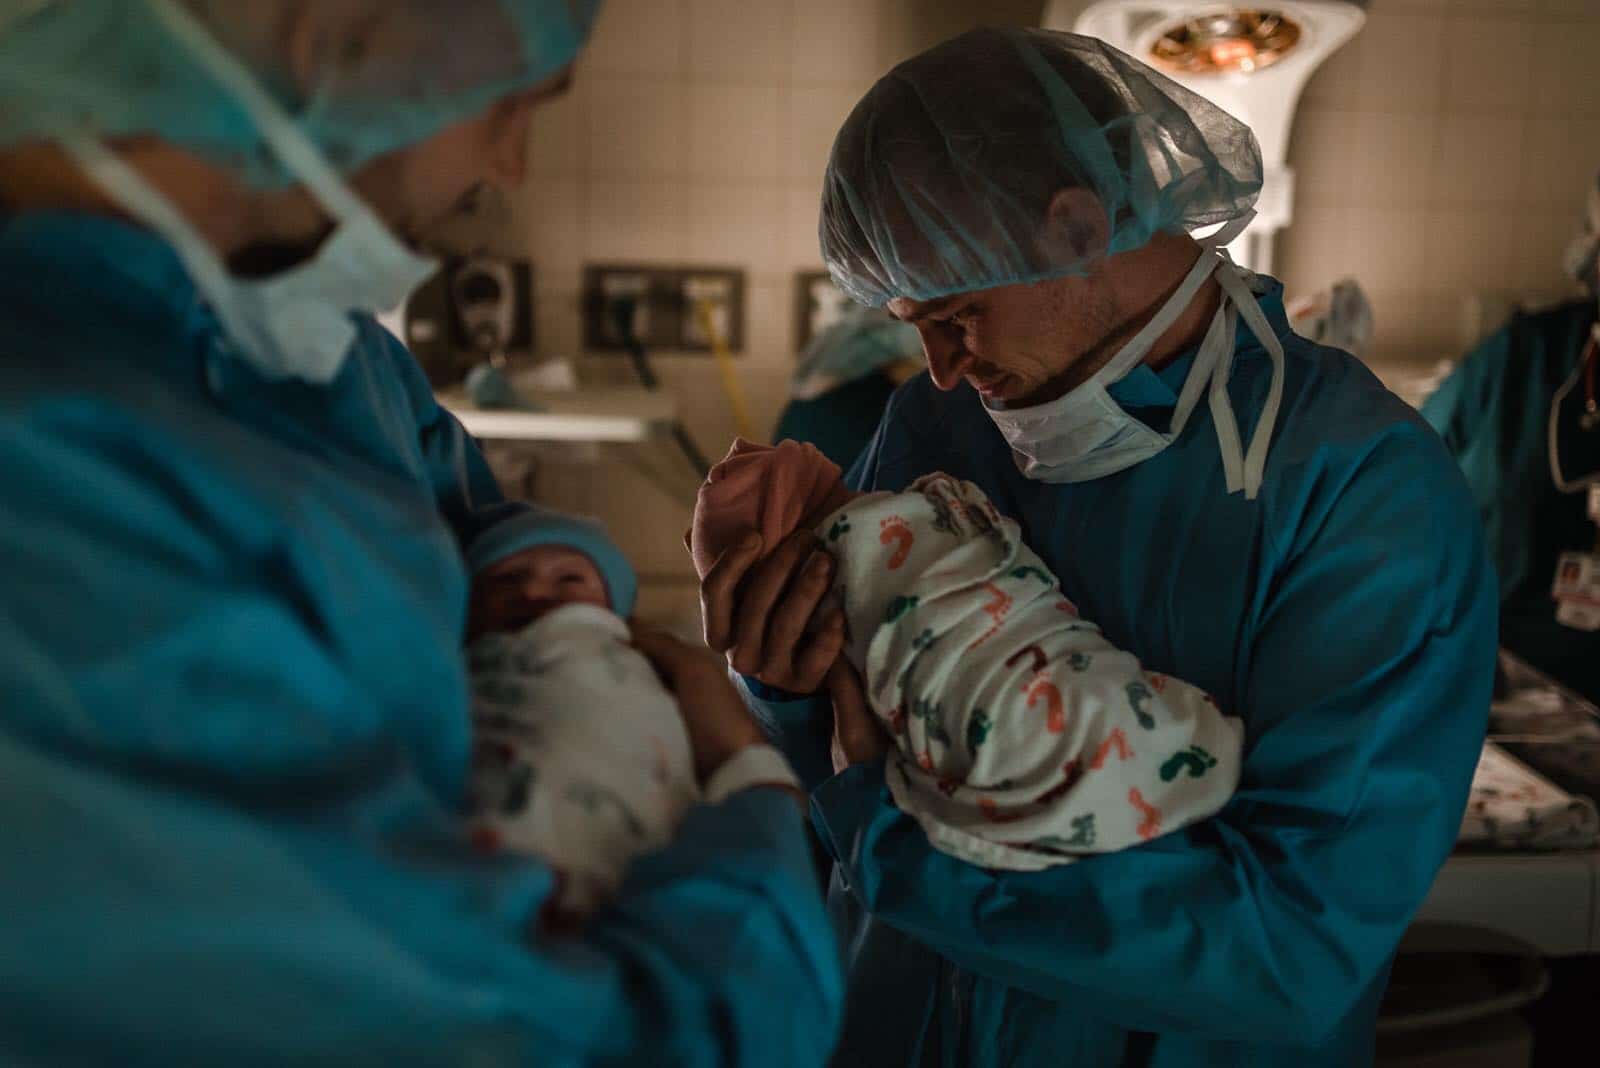 emotional photos and video document the birth of twins via surrogate